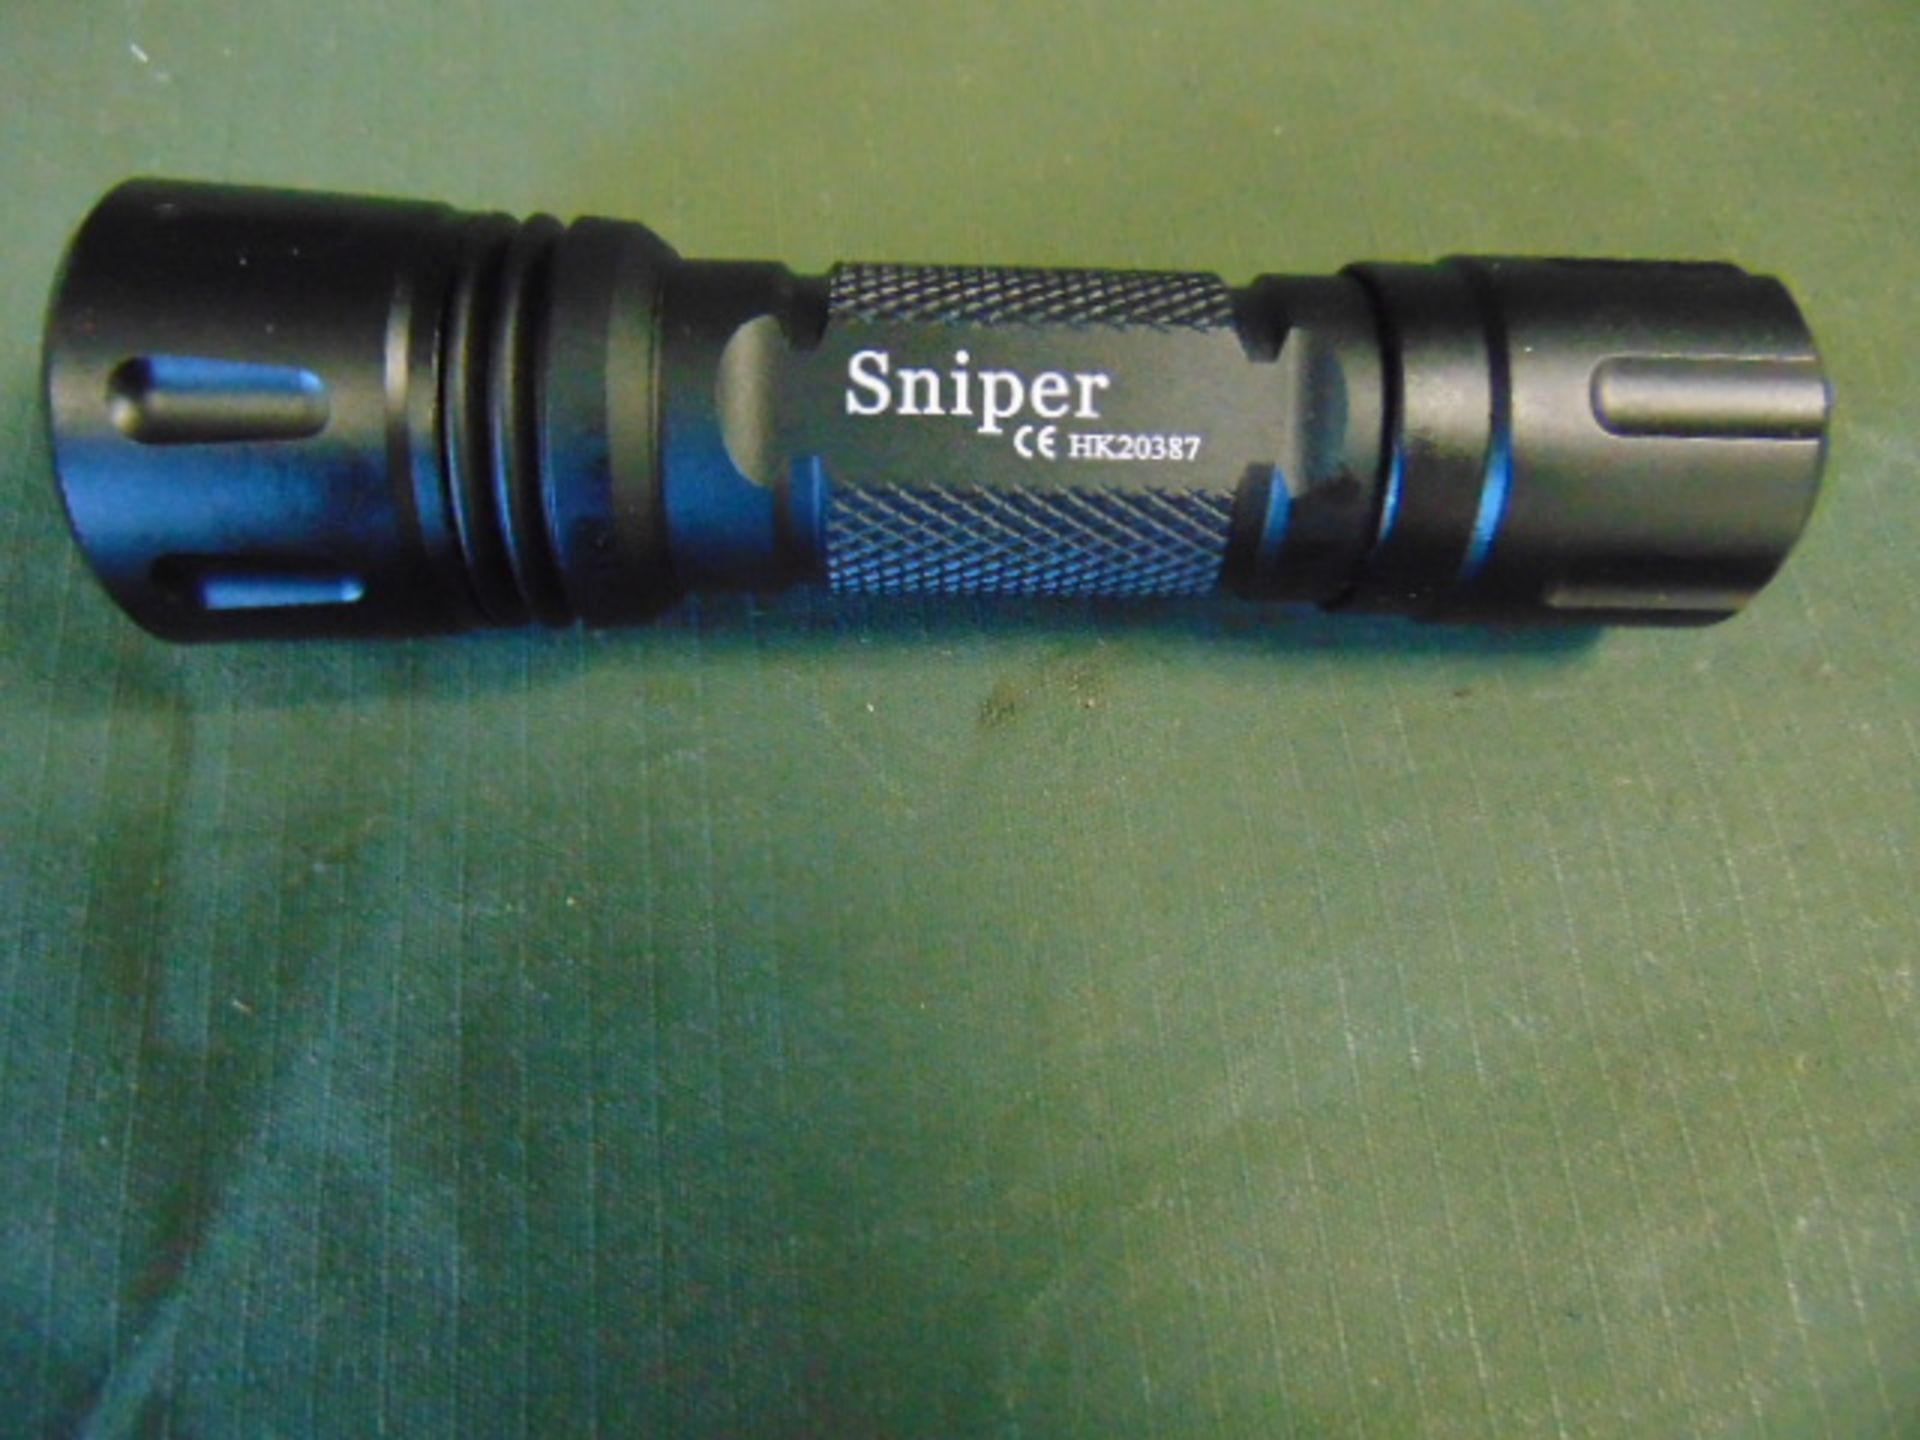 Wolf Eyes Sniper Tactical Flashlight - Image 3 of 6